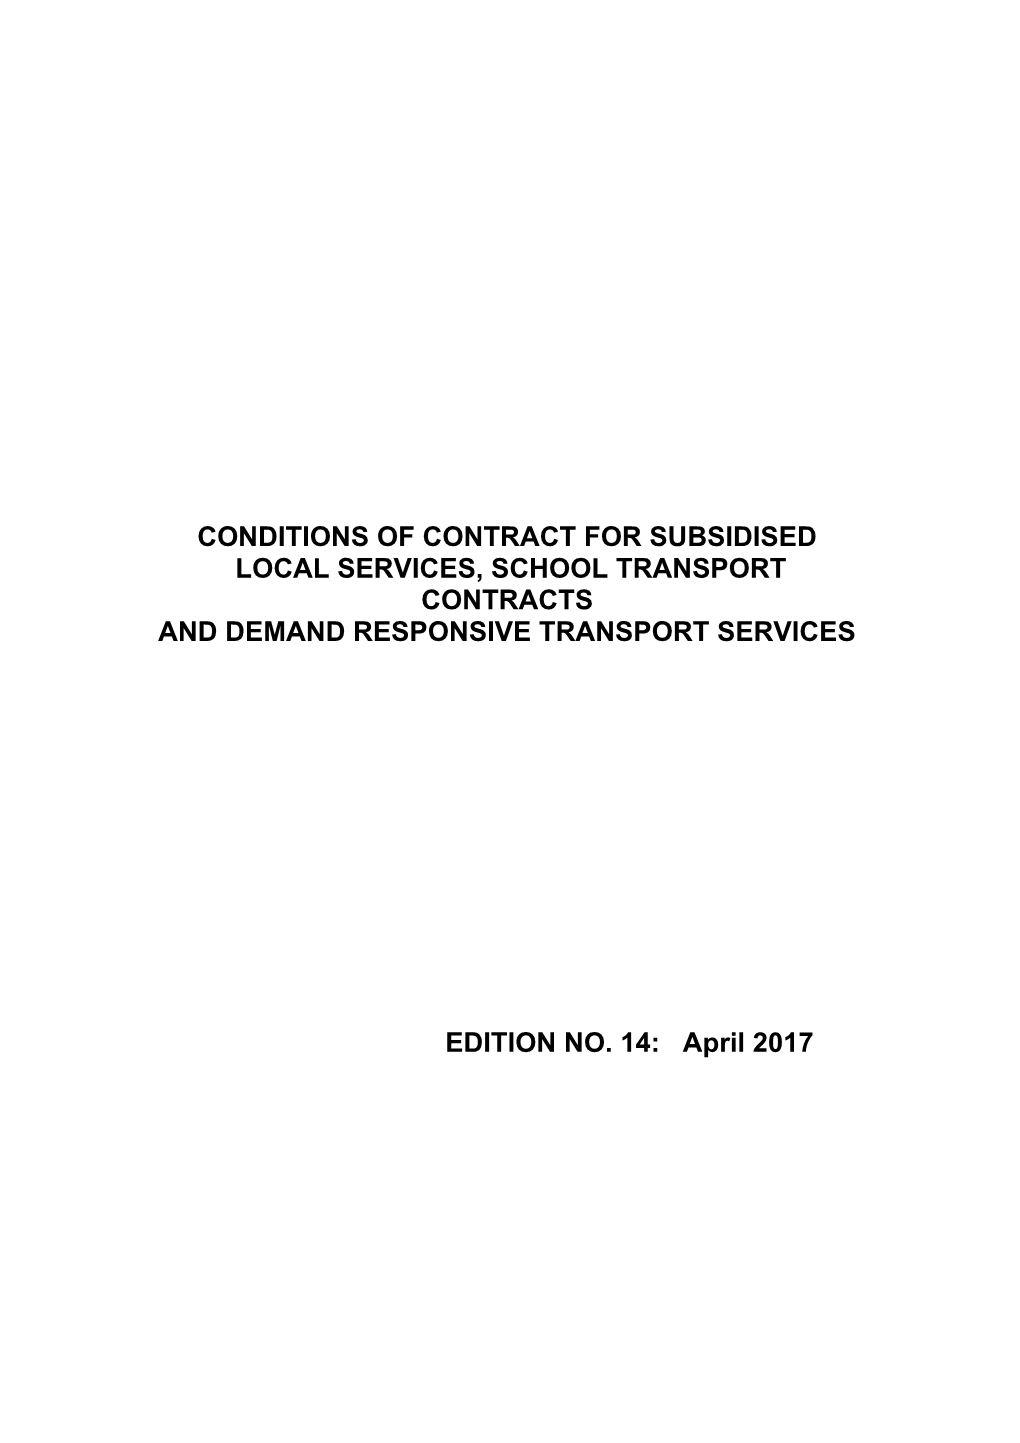 Conditions of Contract for Subsidised